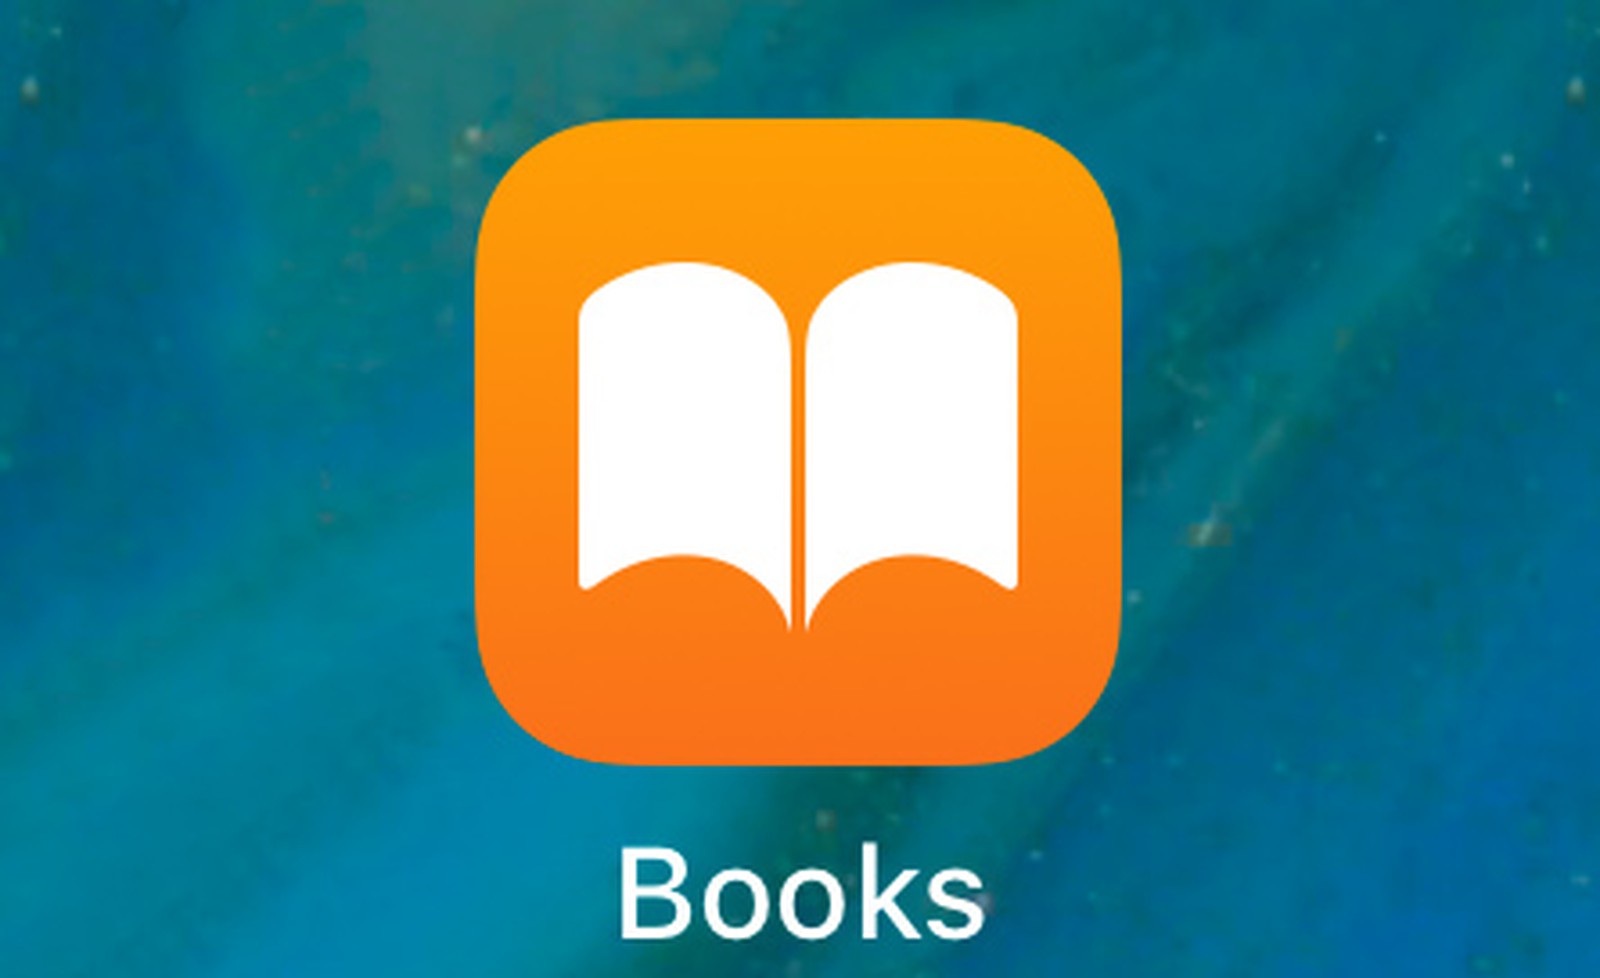 where does openaudible download books to on mac